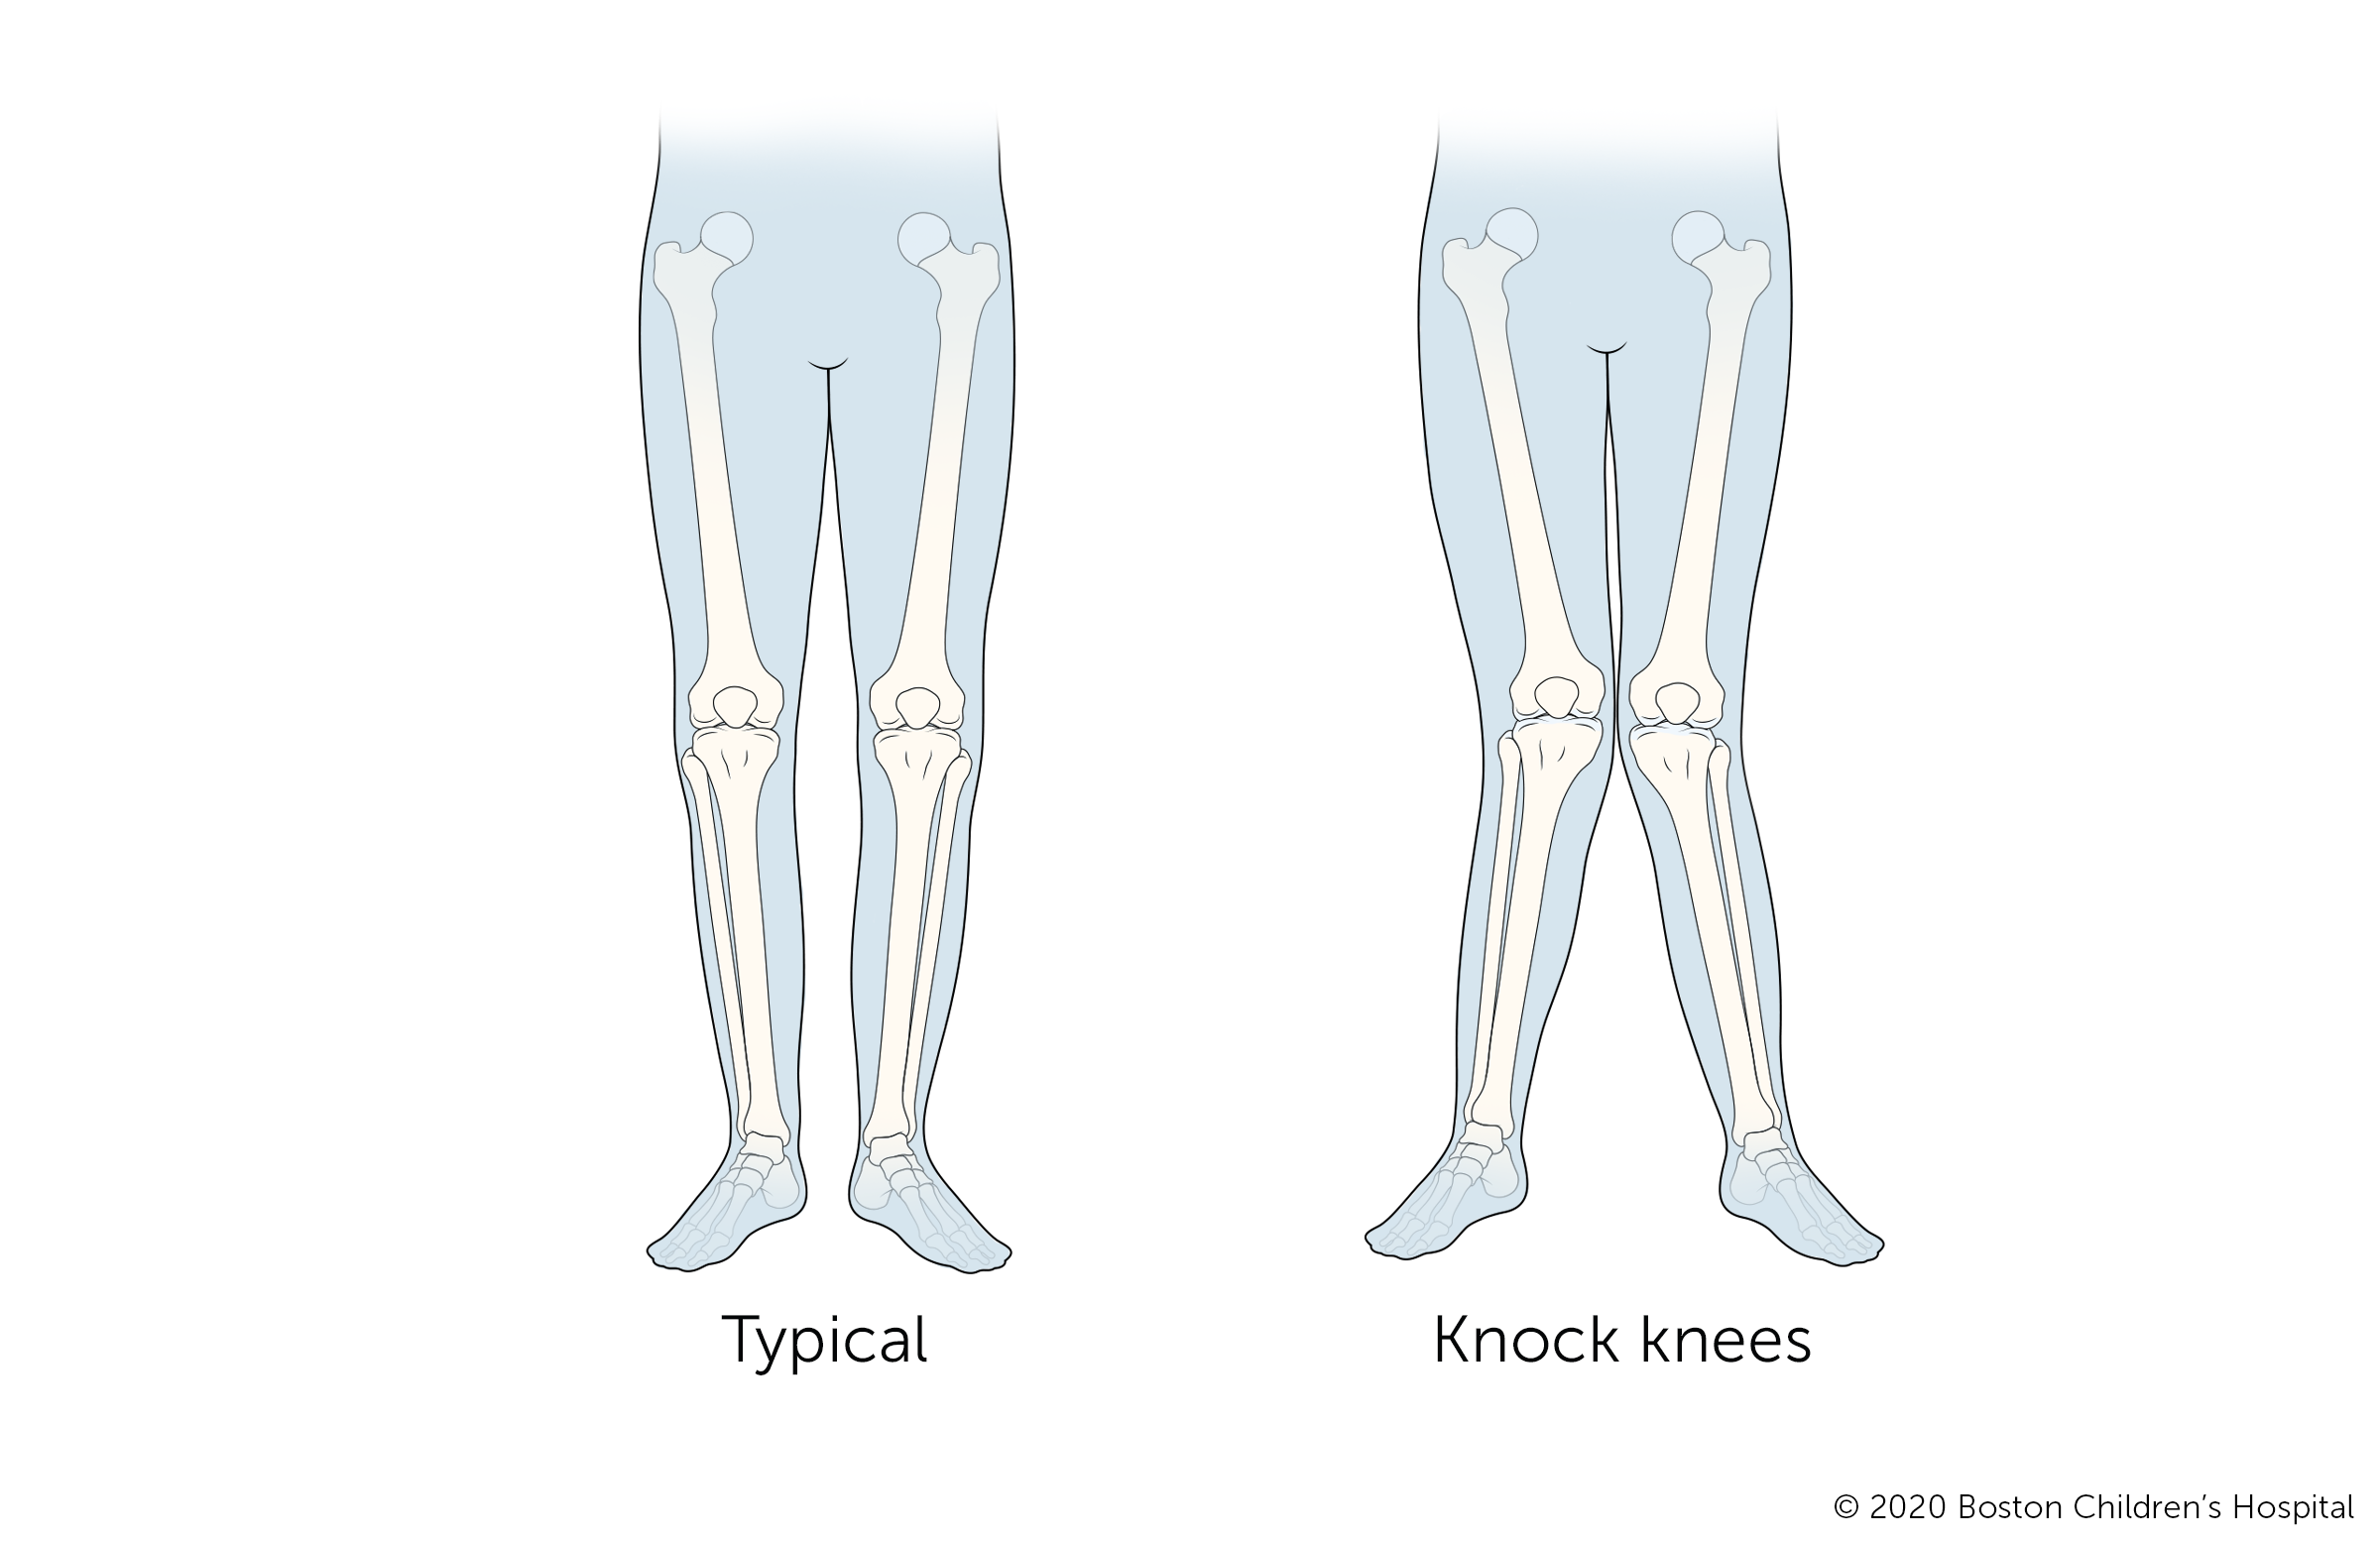 When a child has knock knees, their knees tilt inward while their ankles remain apart.